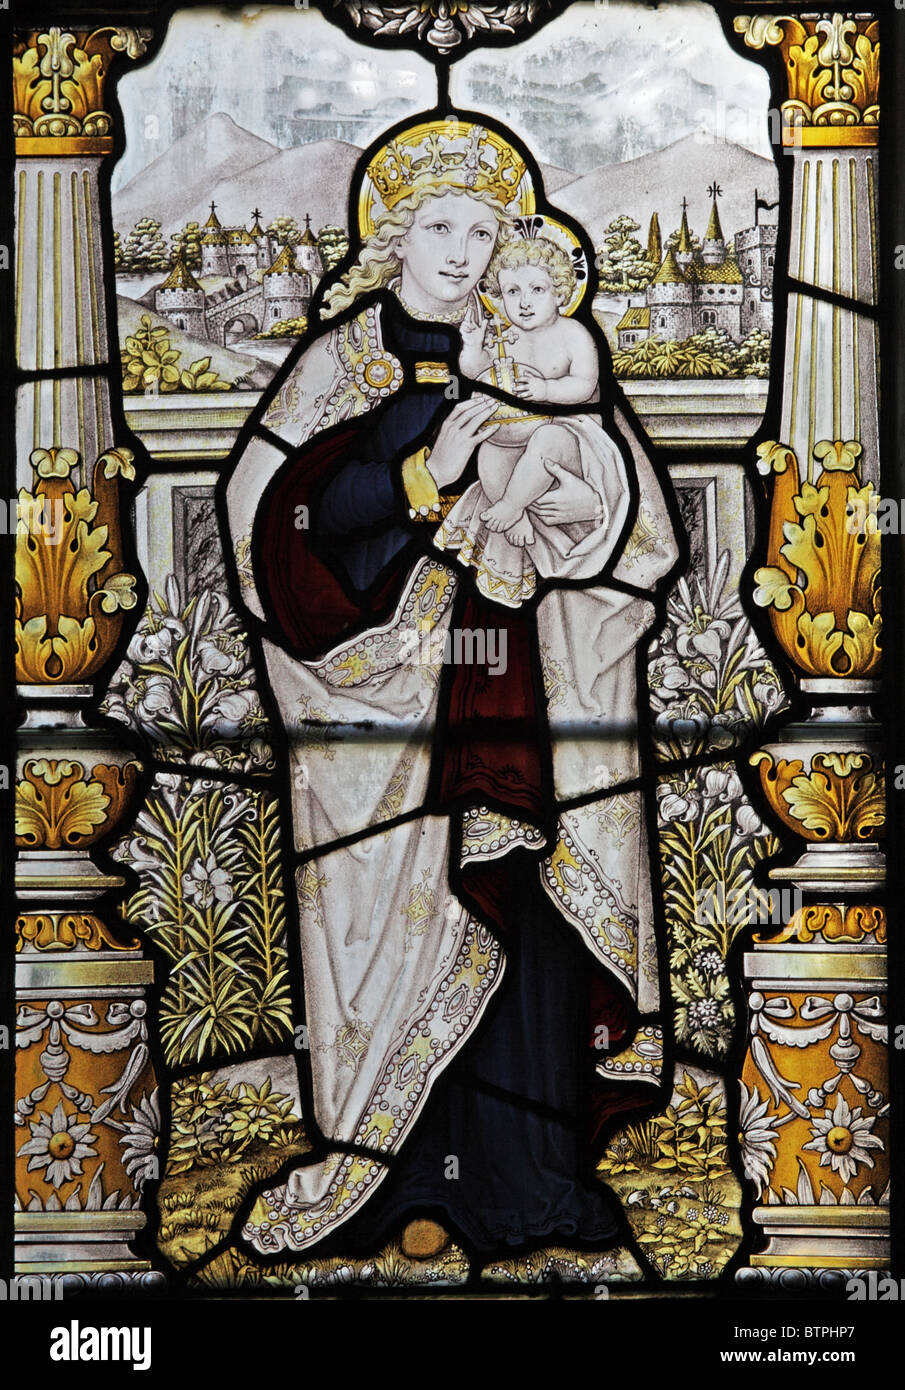 A stained glass window by C E Kempe and Co.depicting The Madonna and Child Stock Photo